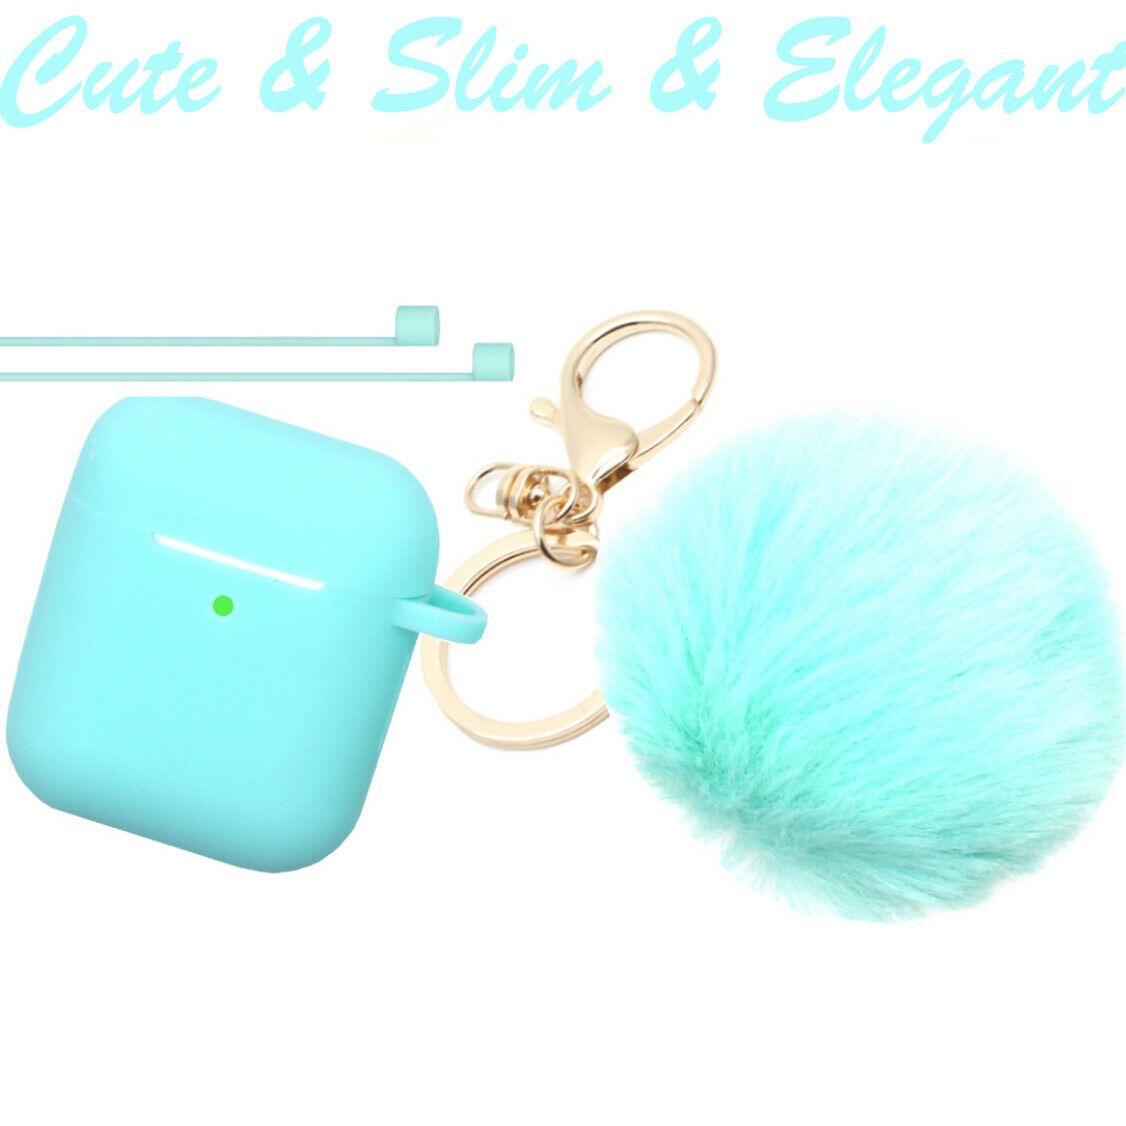 Cute Airpods Silicone Case Cover w/Fur Ball Keychain Strap for Apple Airpods 1/2 ervin.accessories Mint Green 